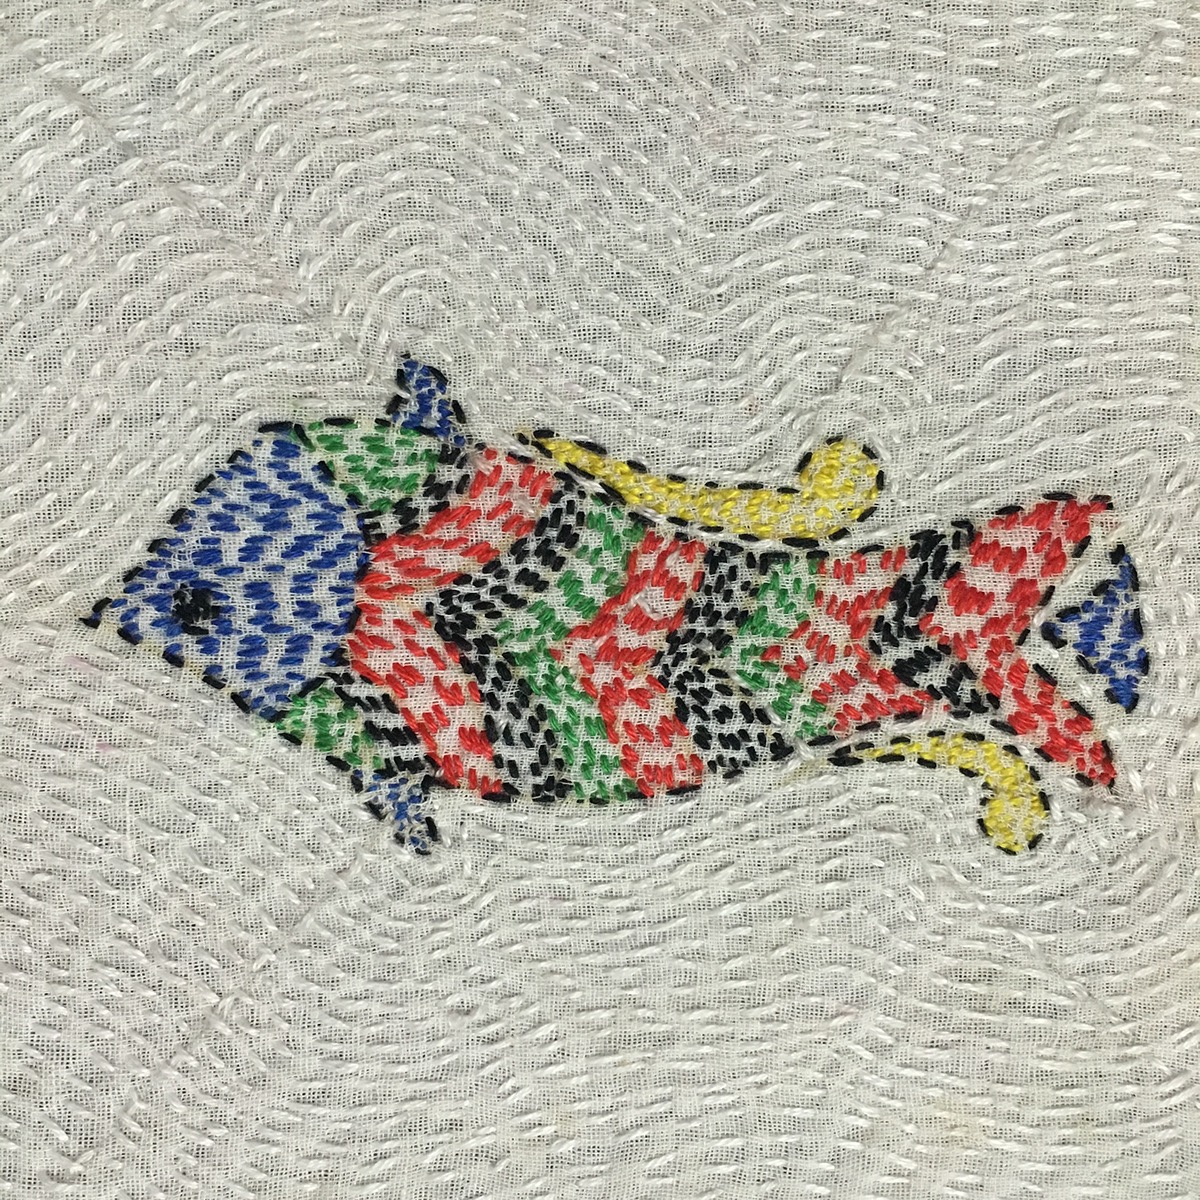 Embroidery surfaceornamentation